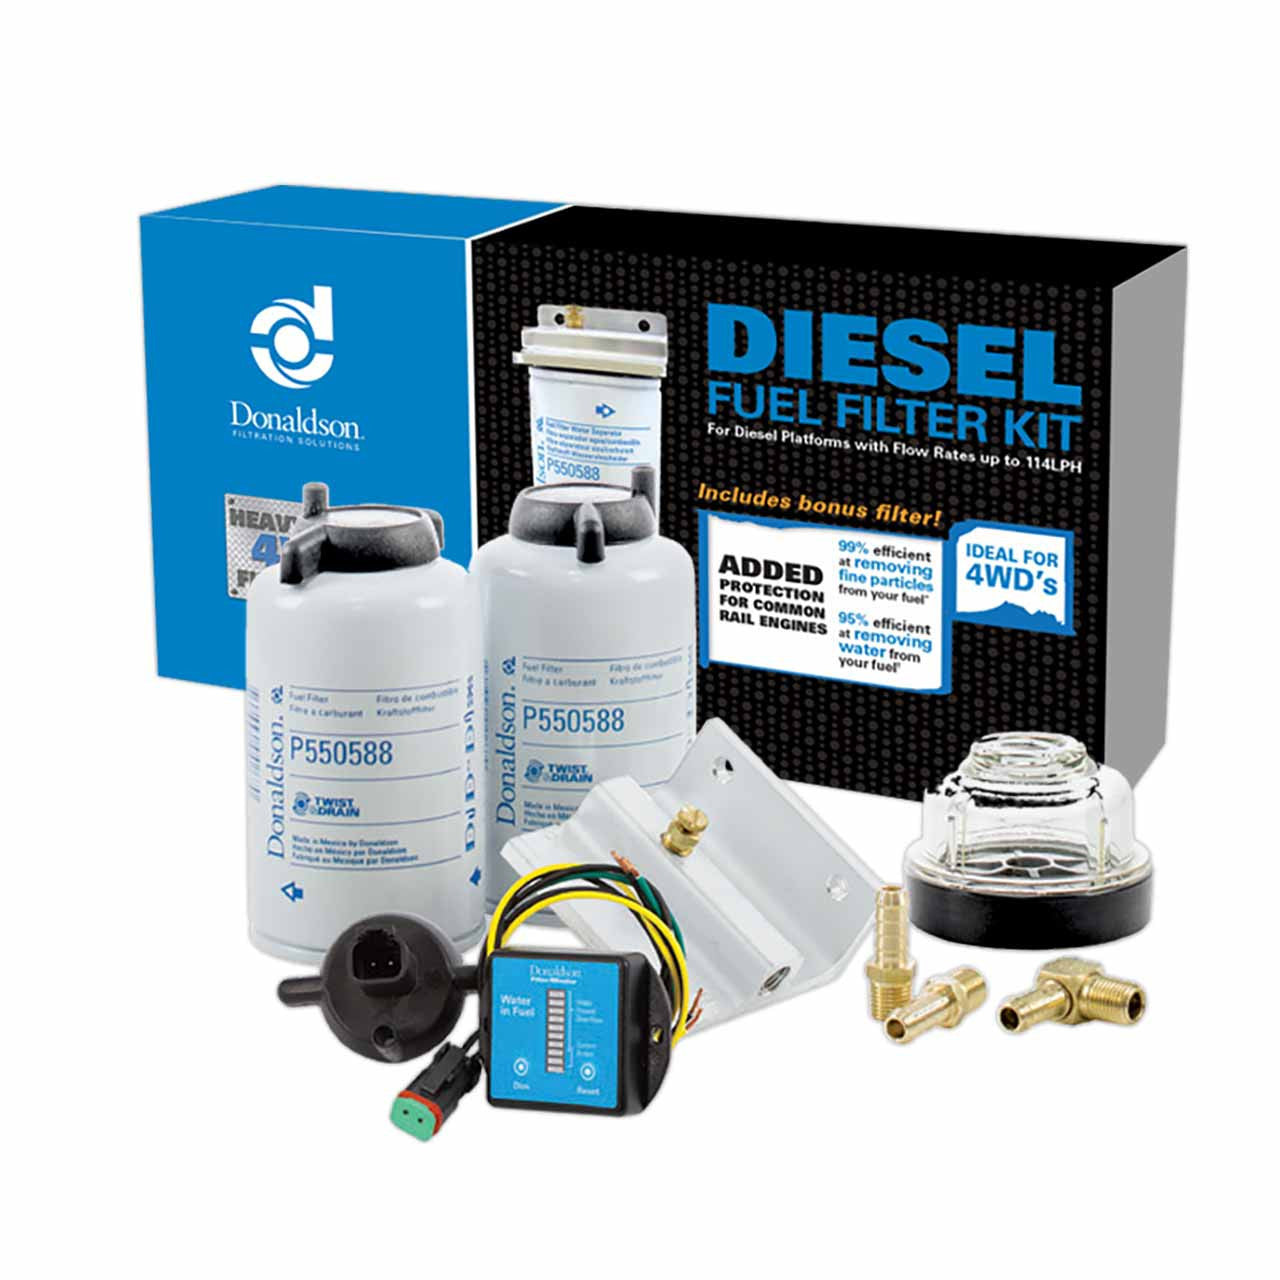 X900164 Donaldson Pre Filter Diesel Fuel Filter Kit with Sensor - 11 Micron Flow Rate Up To 114lph